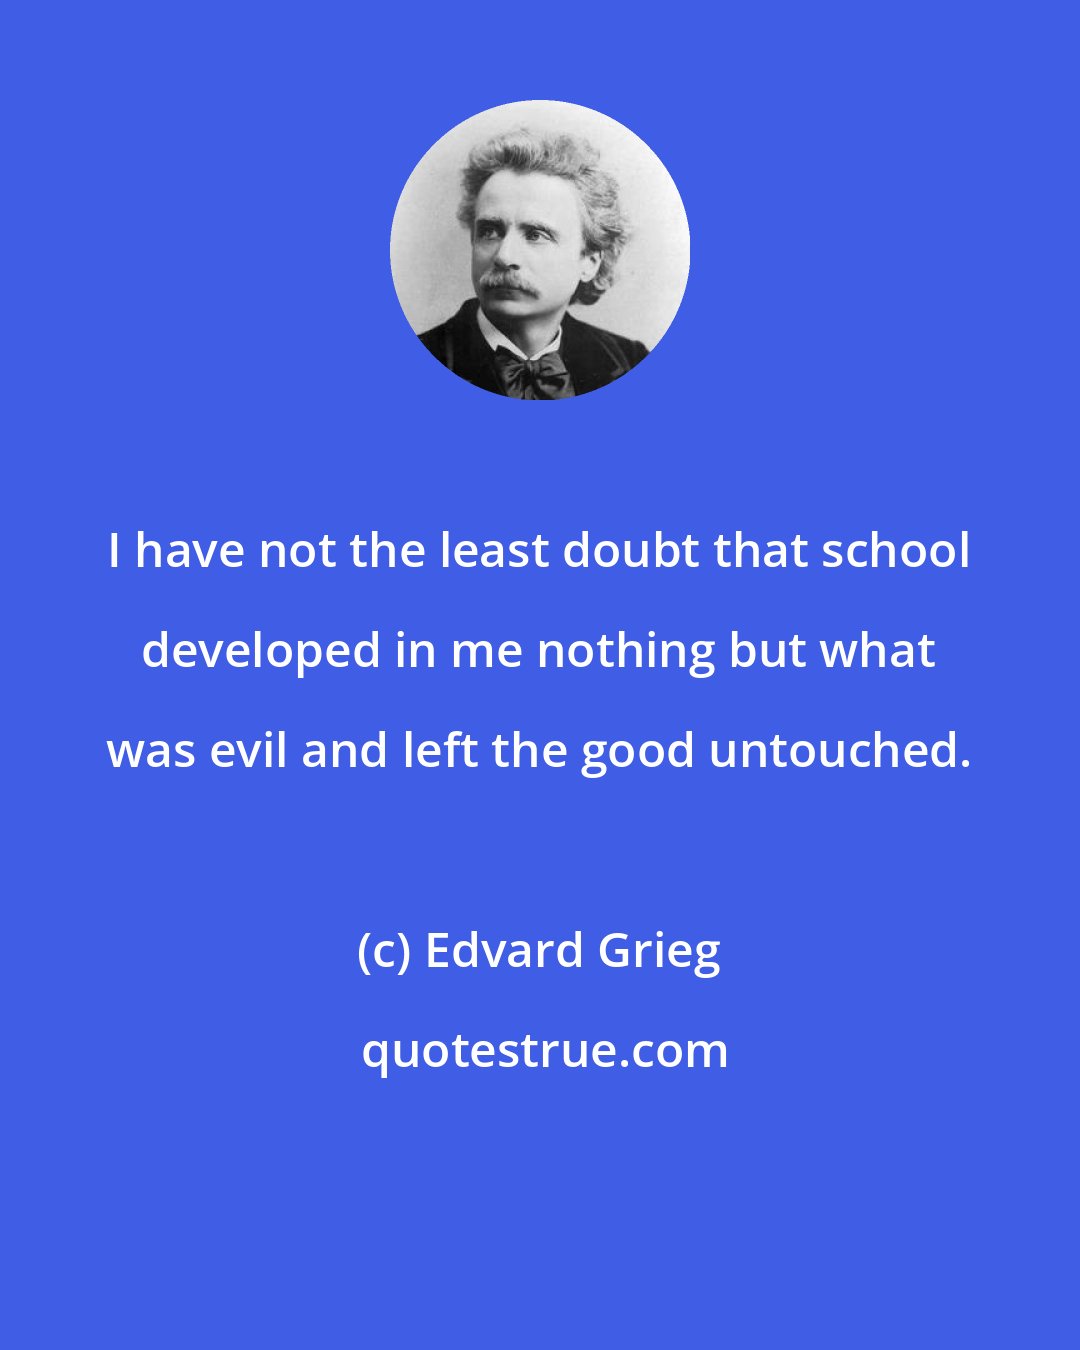 Edvard Grieg: I have not the least doubt that school developed in me nothing but what was evil and left the good untouched.